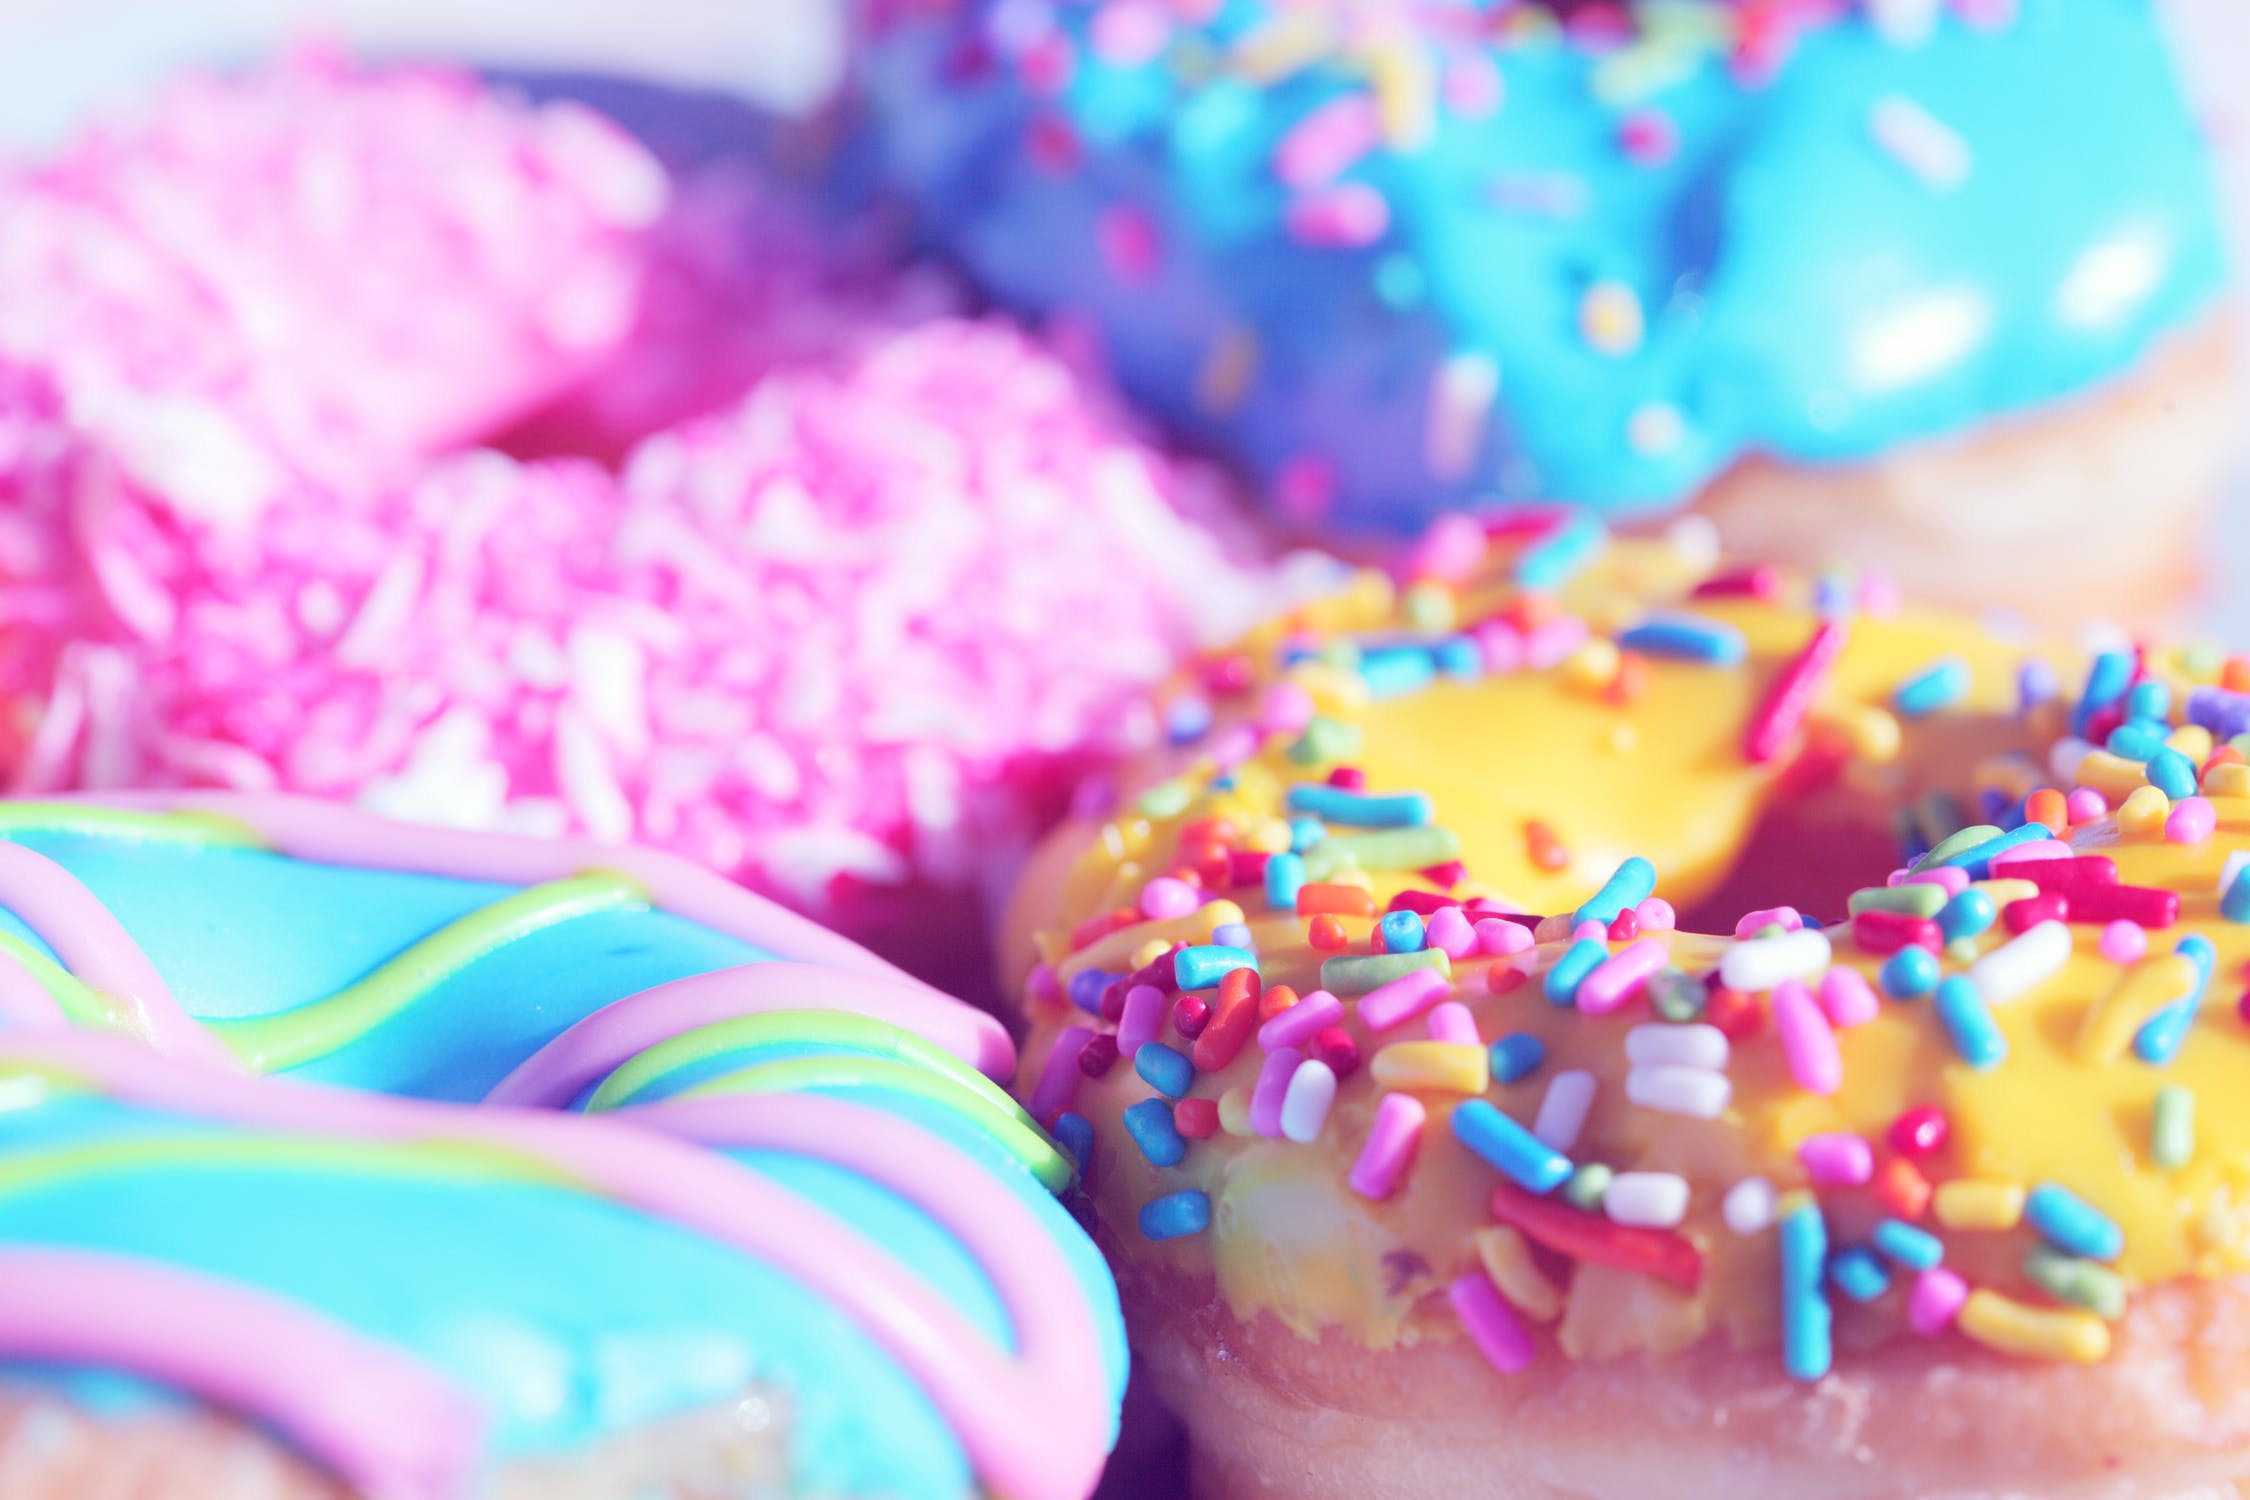 Cheat Day! Where to Find the Best Donuts in Studio City